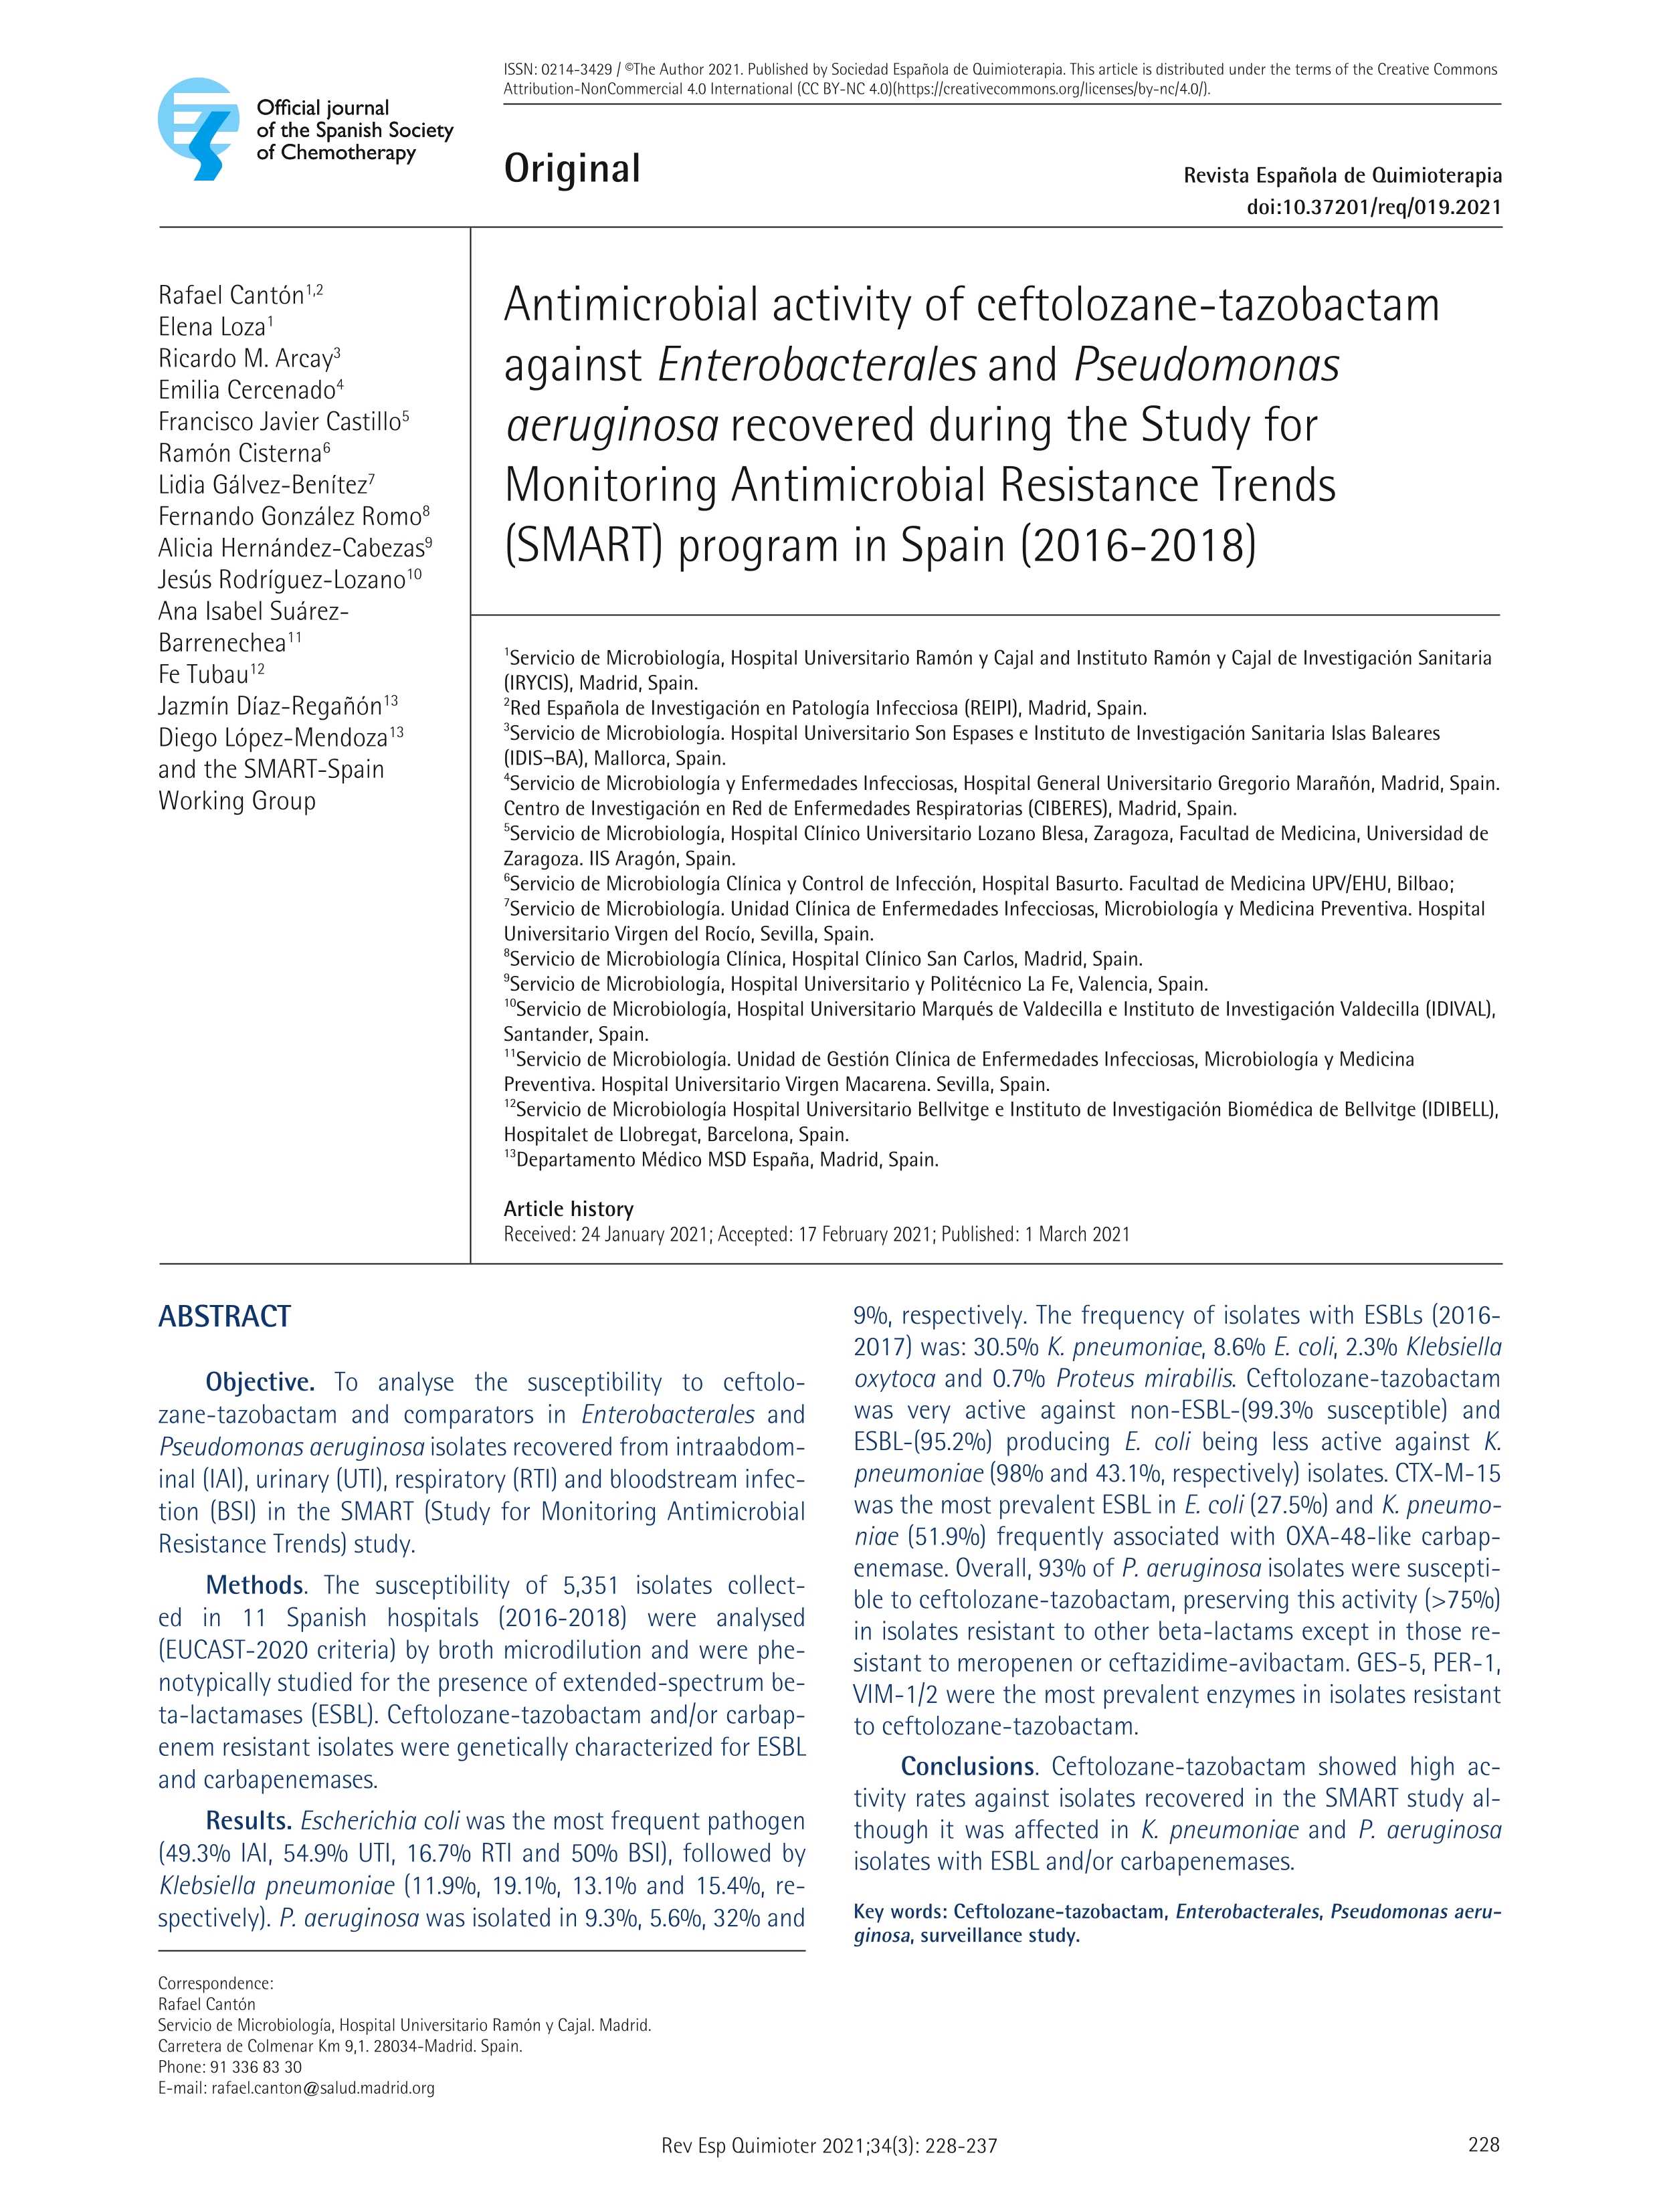 Antimicrobial activity of ceftolozane-tazobactam against Enterobacterales and Pseudomonas aeruginosa recovered during the Study for Monitoring Antimicrobial Resistance Trends (SMART) program in Spain (2016-2018)